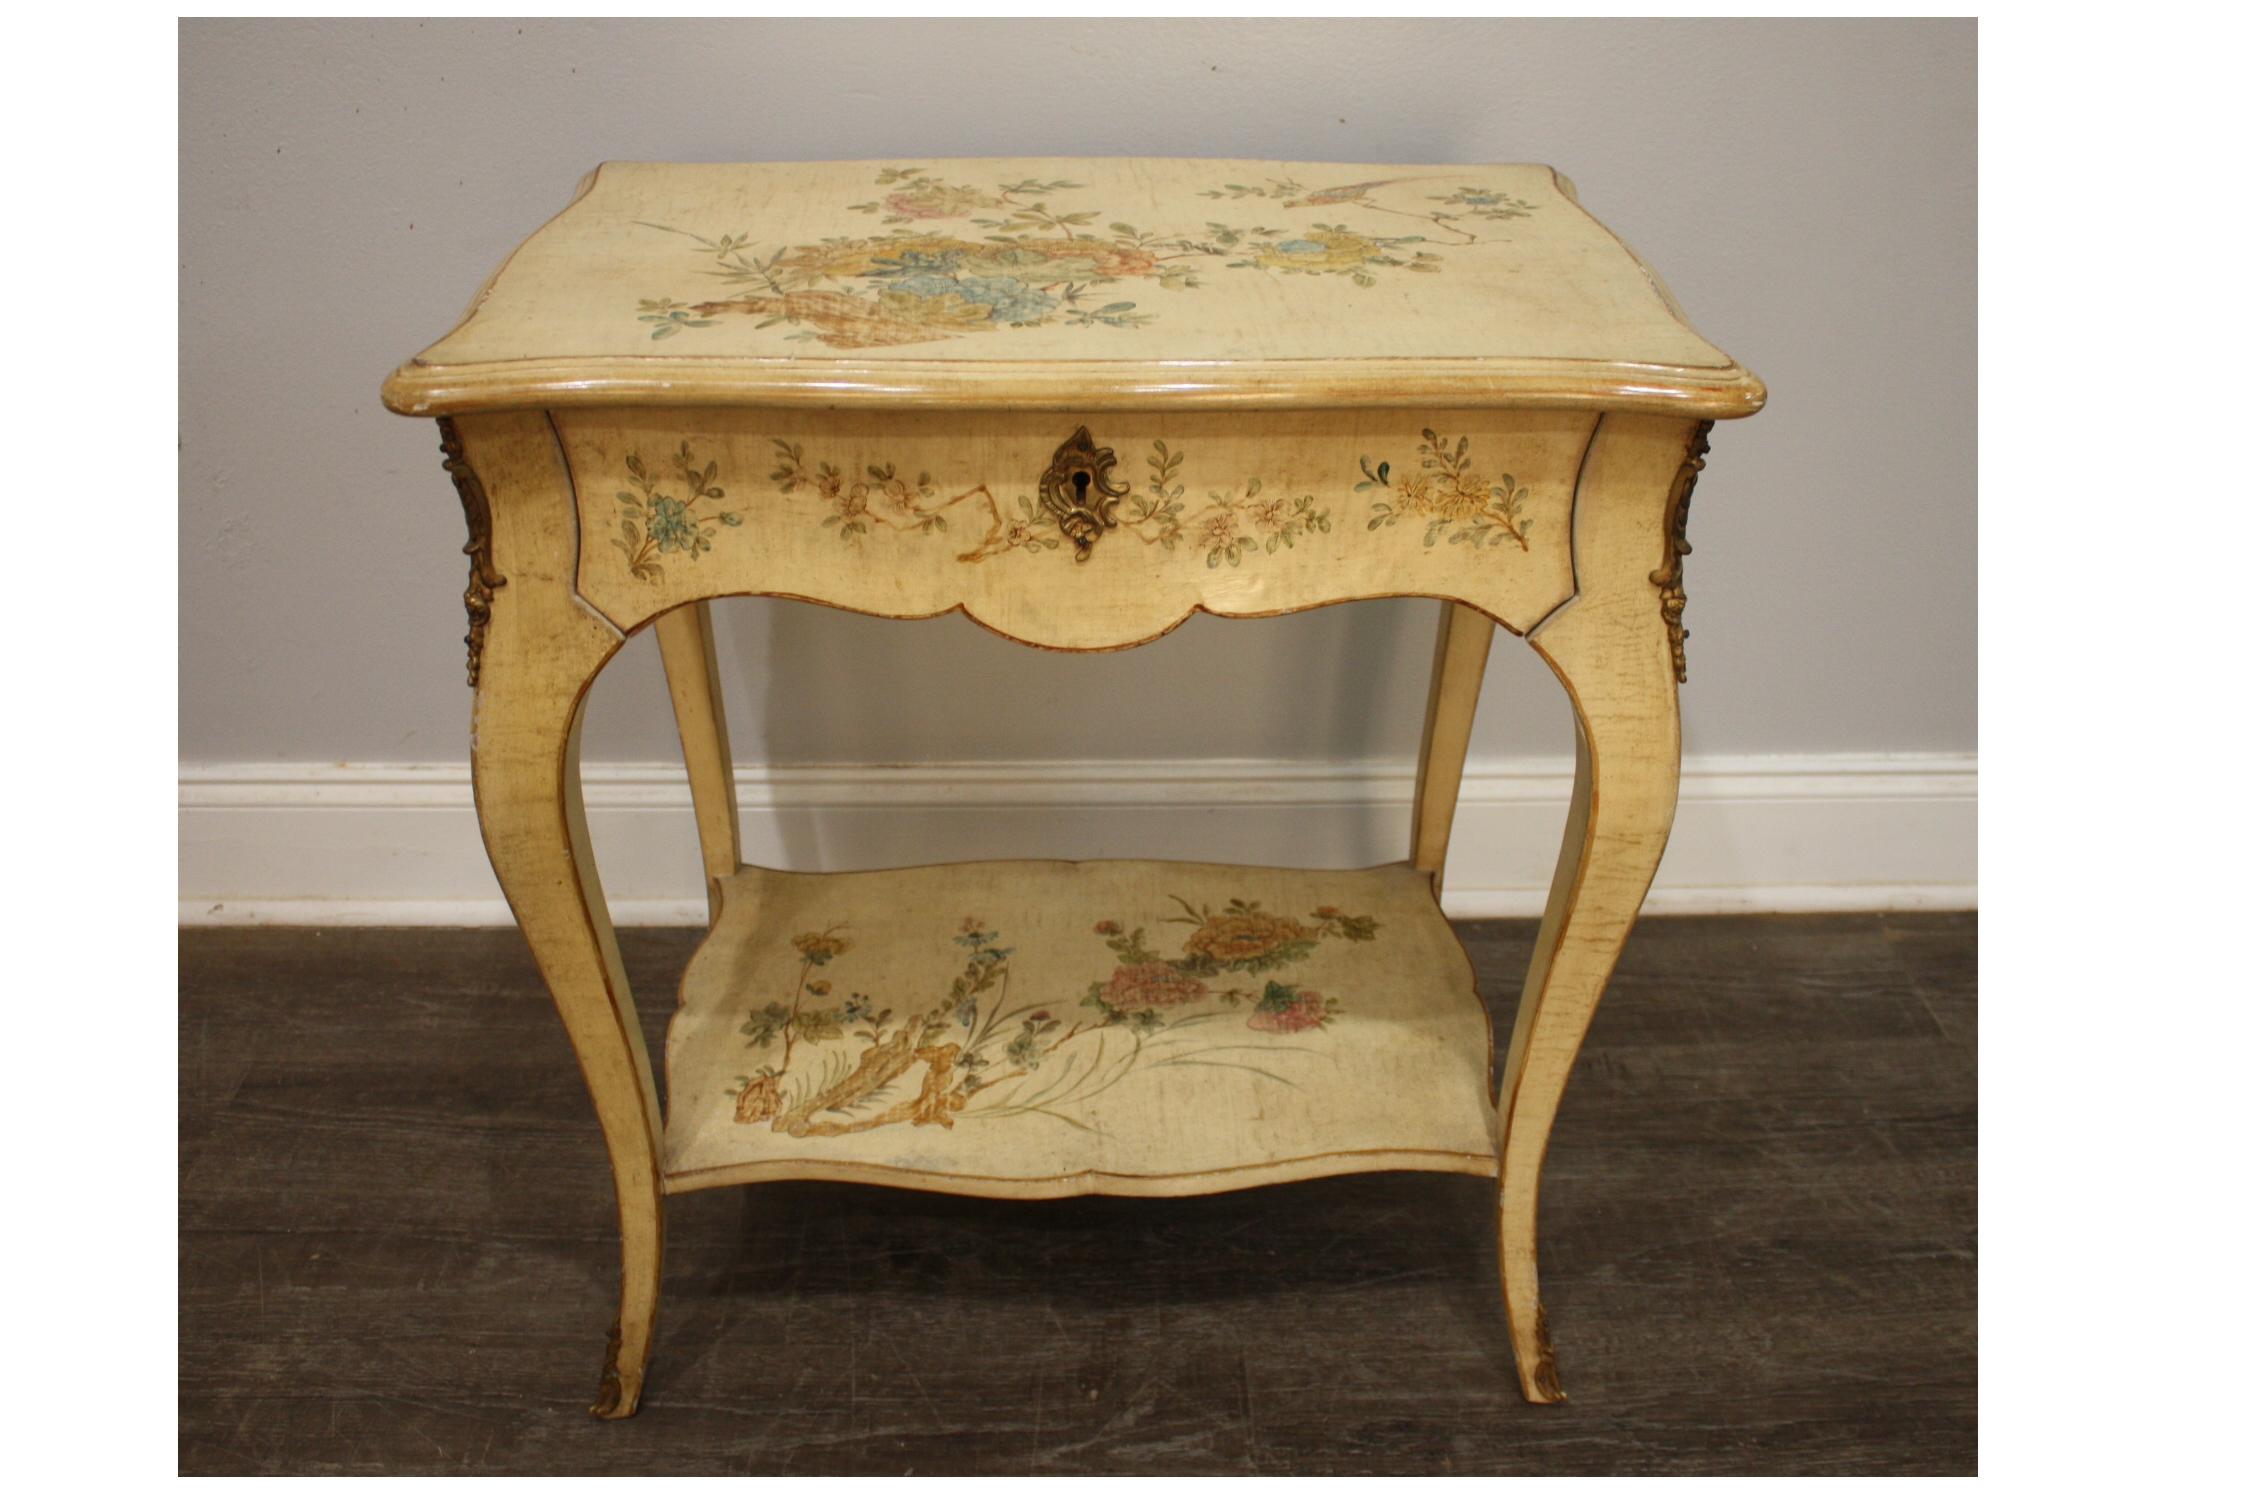 This Louis XV style table is painted and lacquered with a wonderful patine on it. It has as well a key.